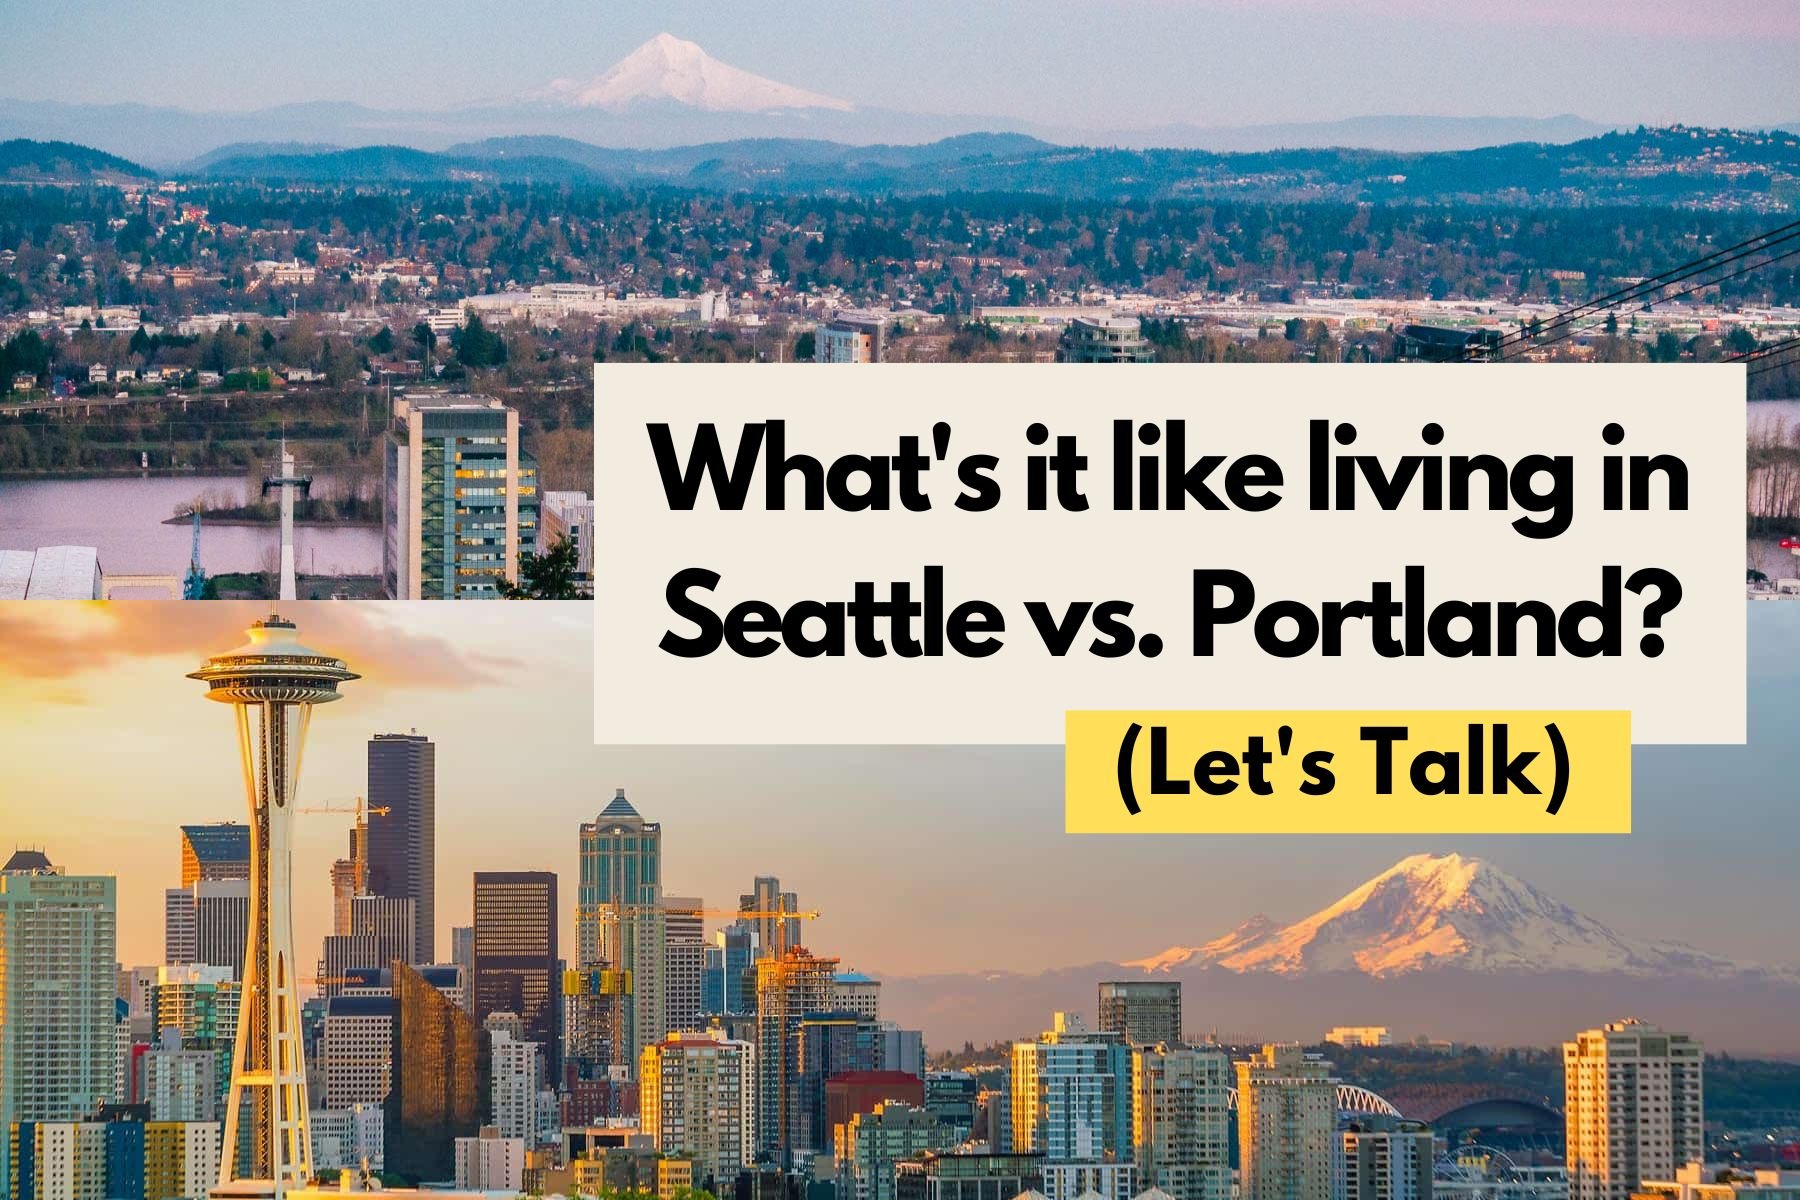 Moving to Portland vs. Seattle